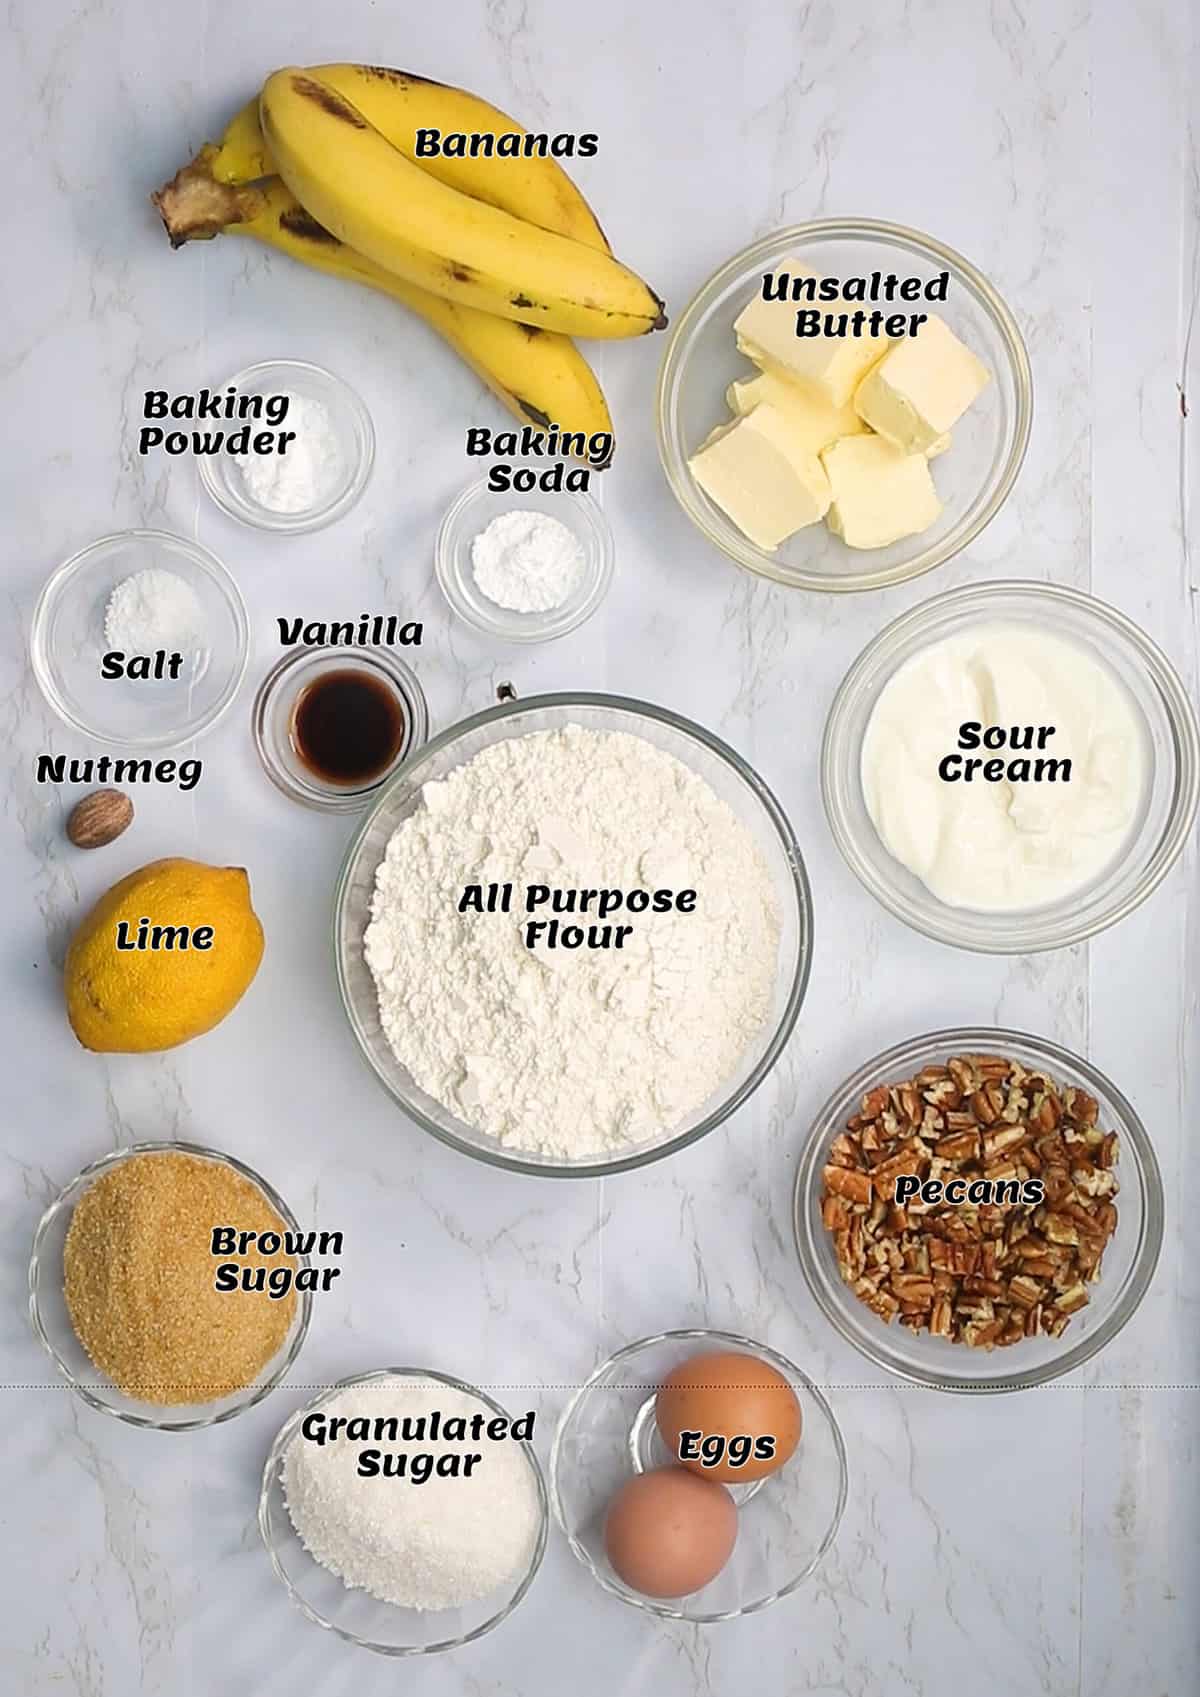 The ingredients you need to make this recipe